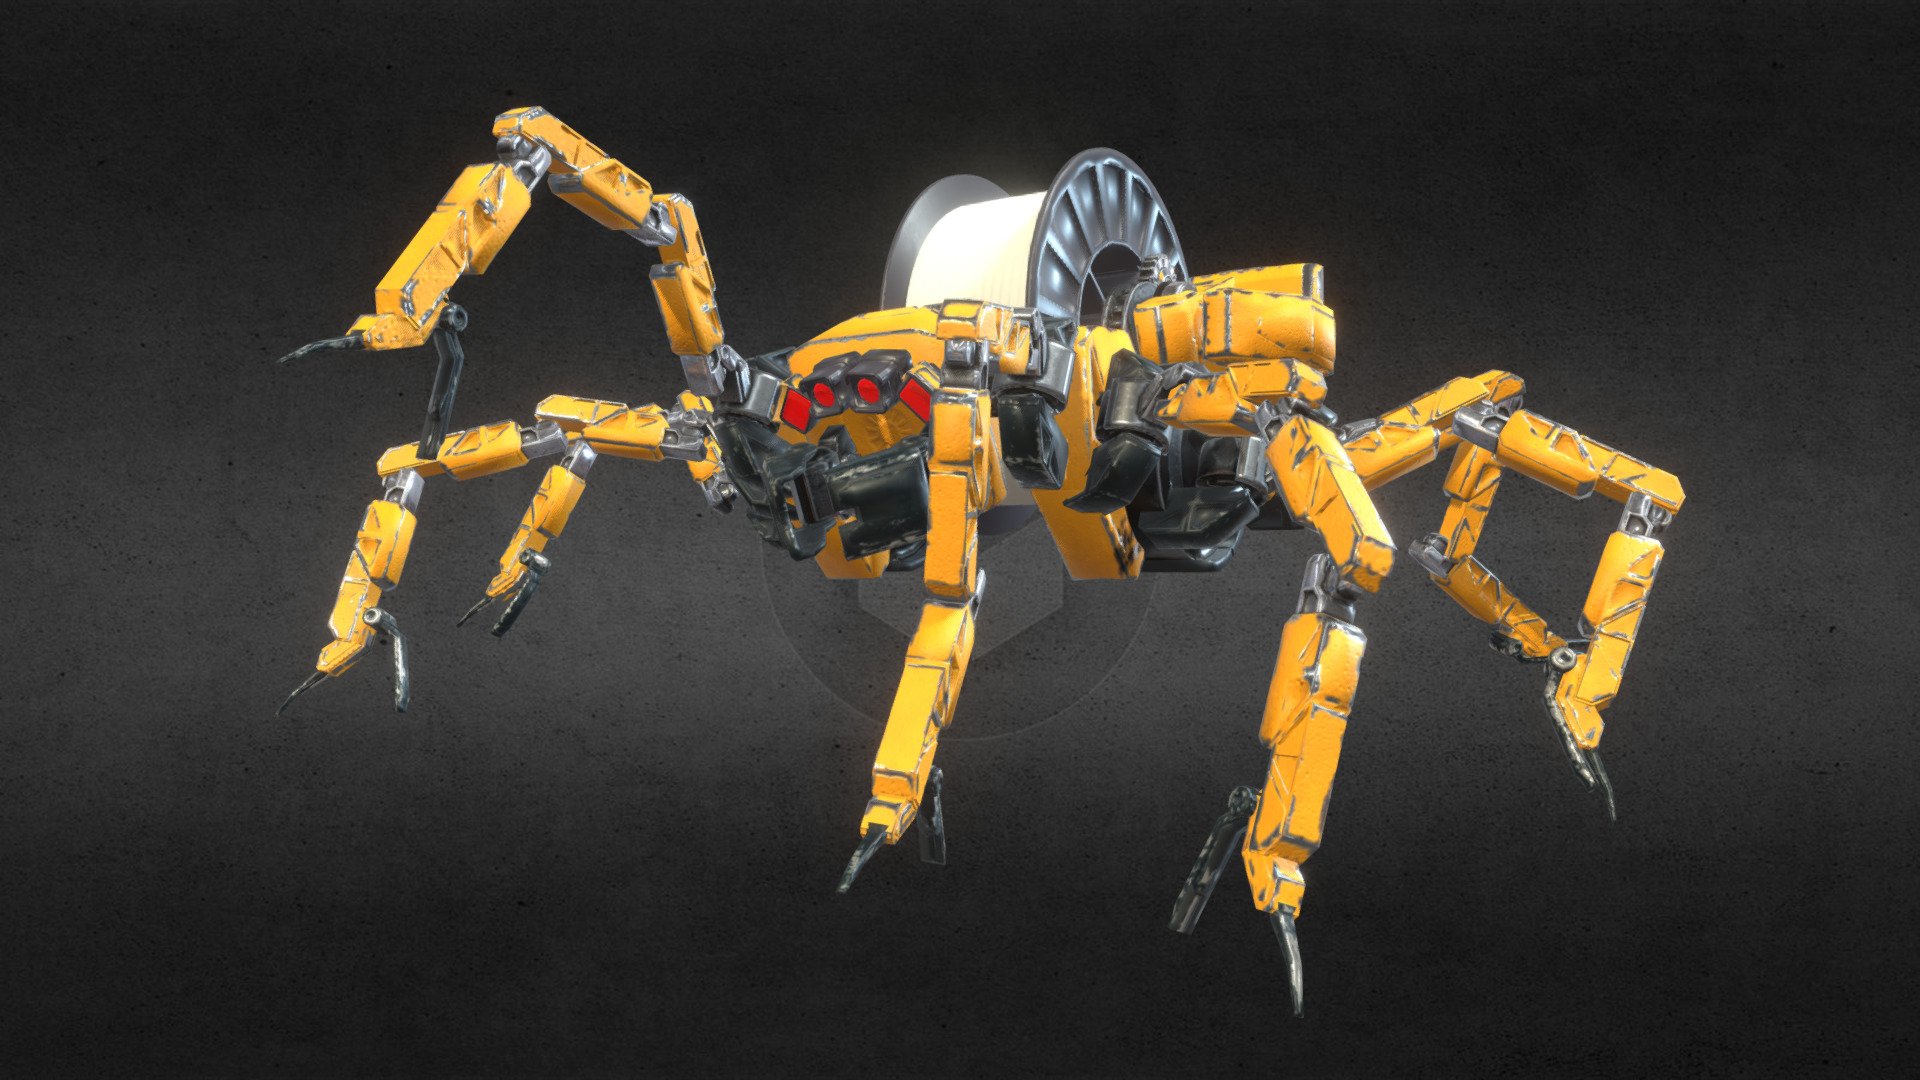 Sci-Fi spider robot. Originally designed to 3d-print complex structures using its integrated spool and printhead, it can also be used for all your mechanical spider needs!

4K PBR texture set :
- Albedo
- Metalness/Roughness
- Normal - Mechanical Spider - Buy Royalty Free 3D model by thibsert (@thibsert2) 3d model